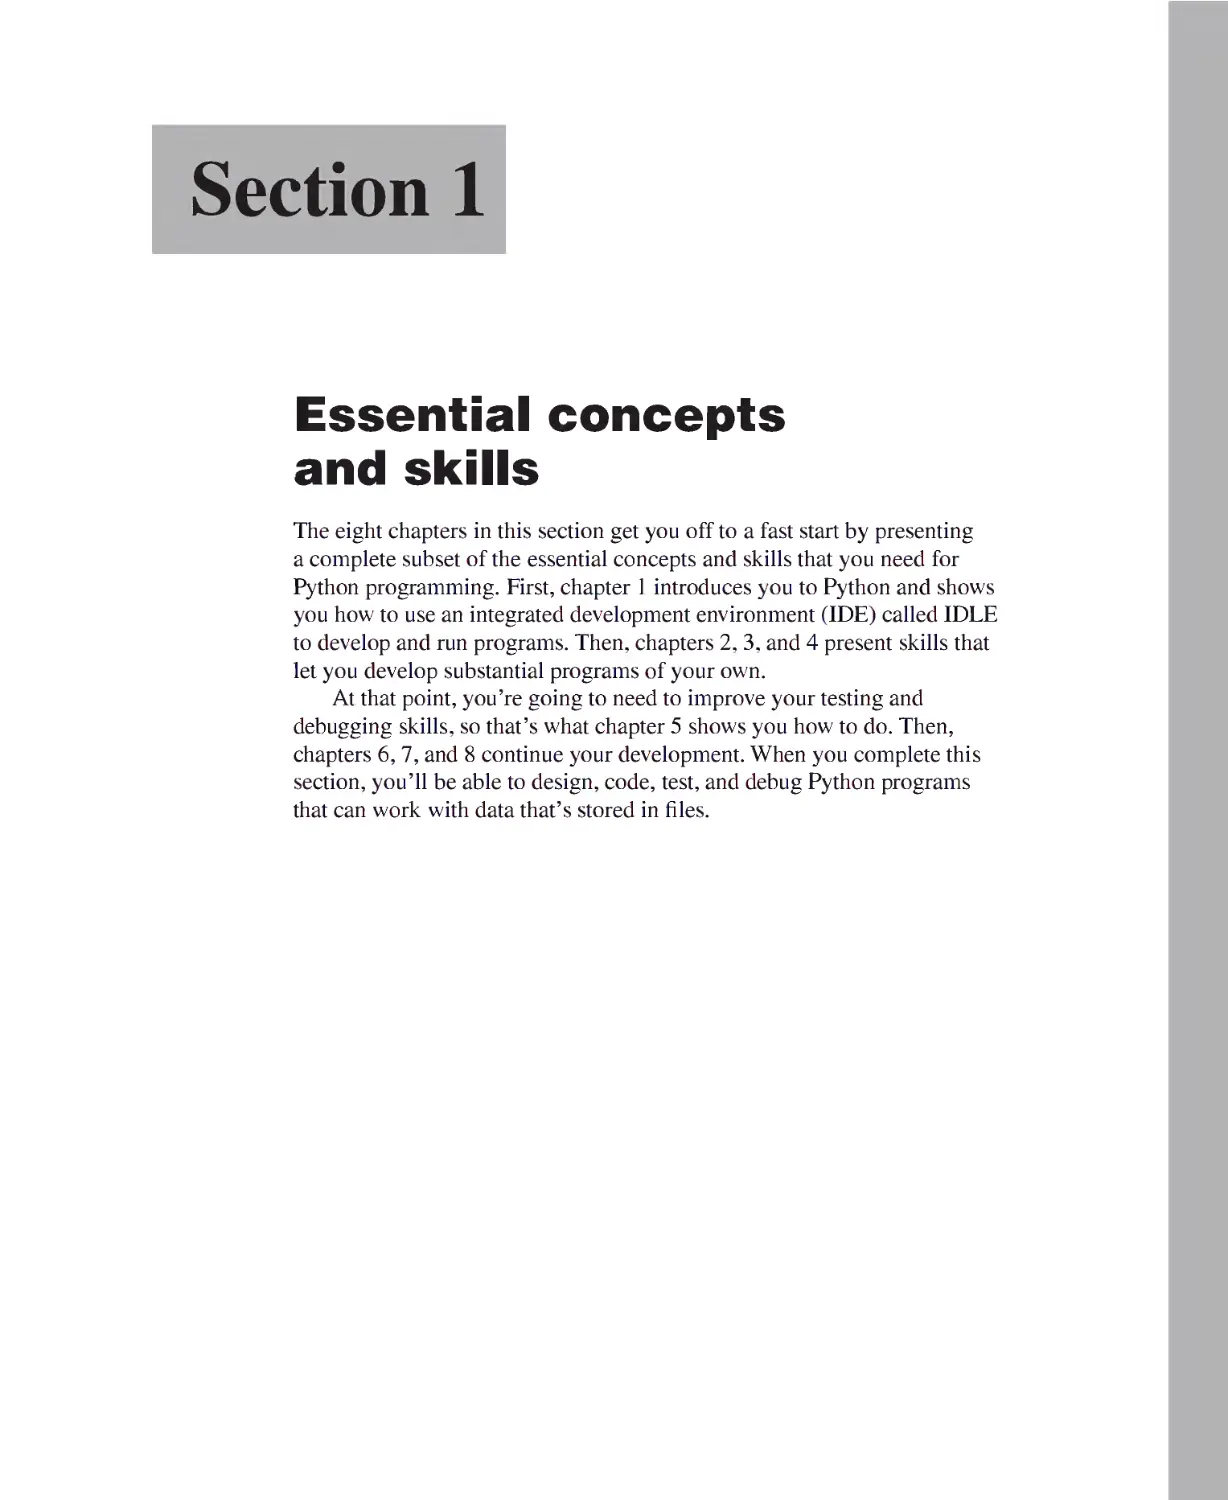 Section 1 - Essential Concepts and Skills